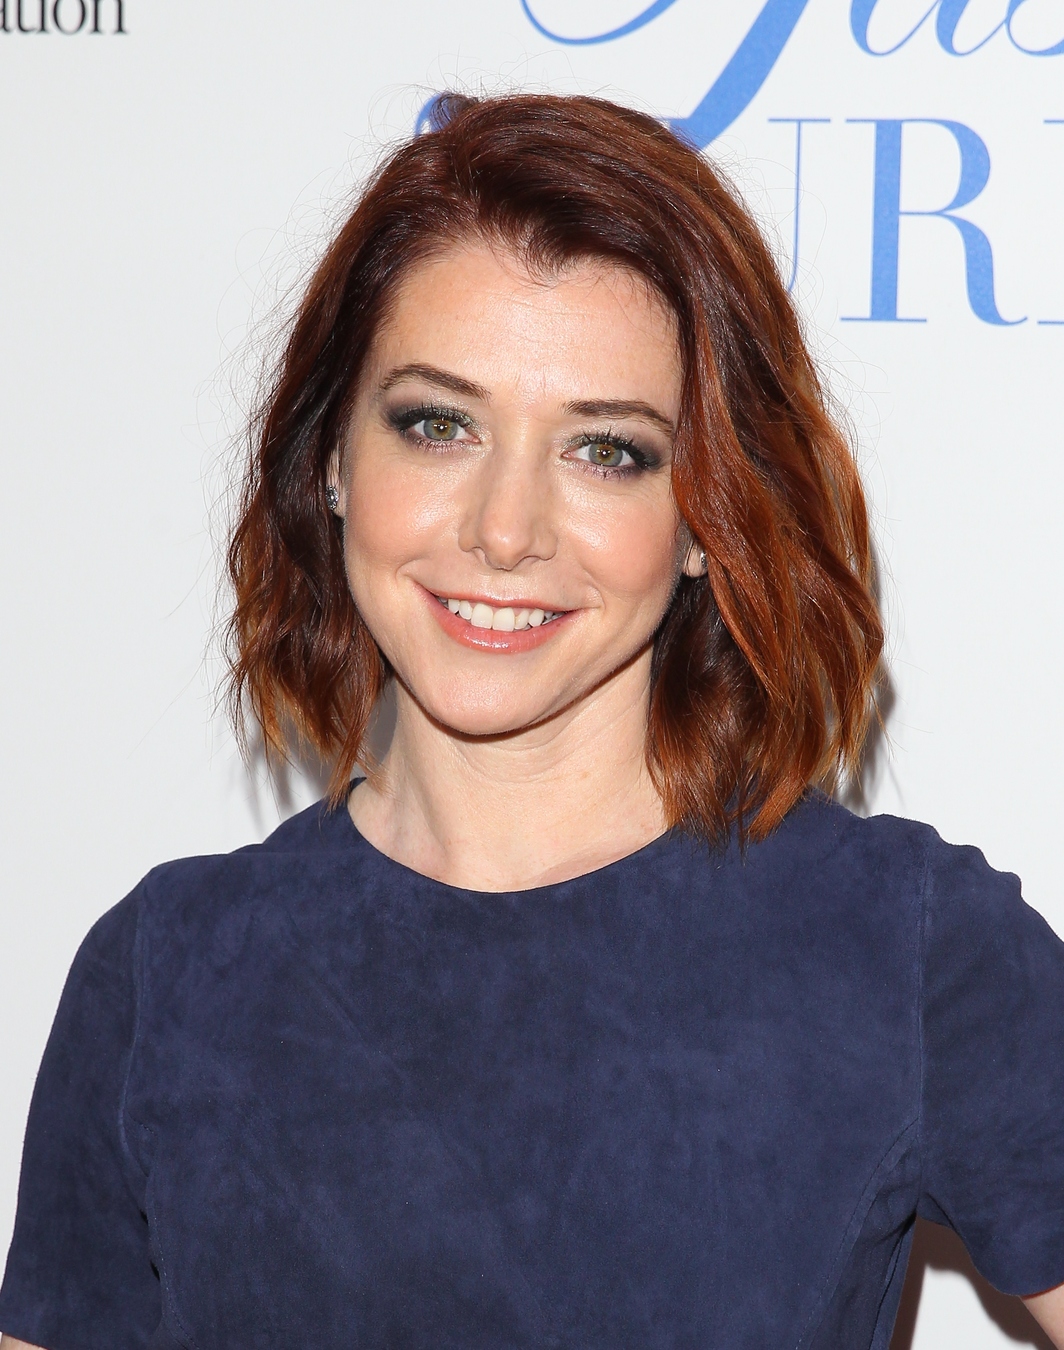 Alyson Hannigan joins cast of second season of “Pure”